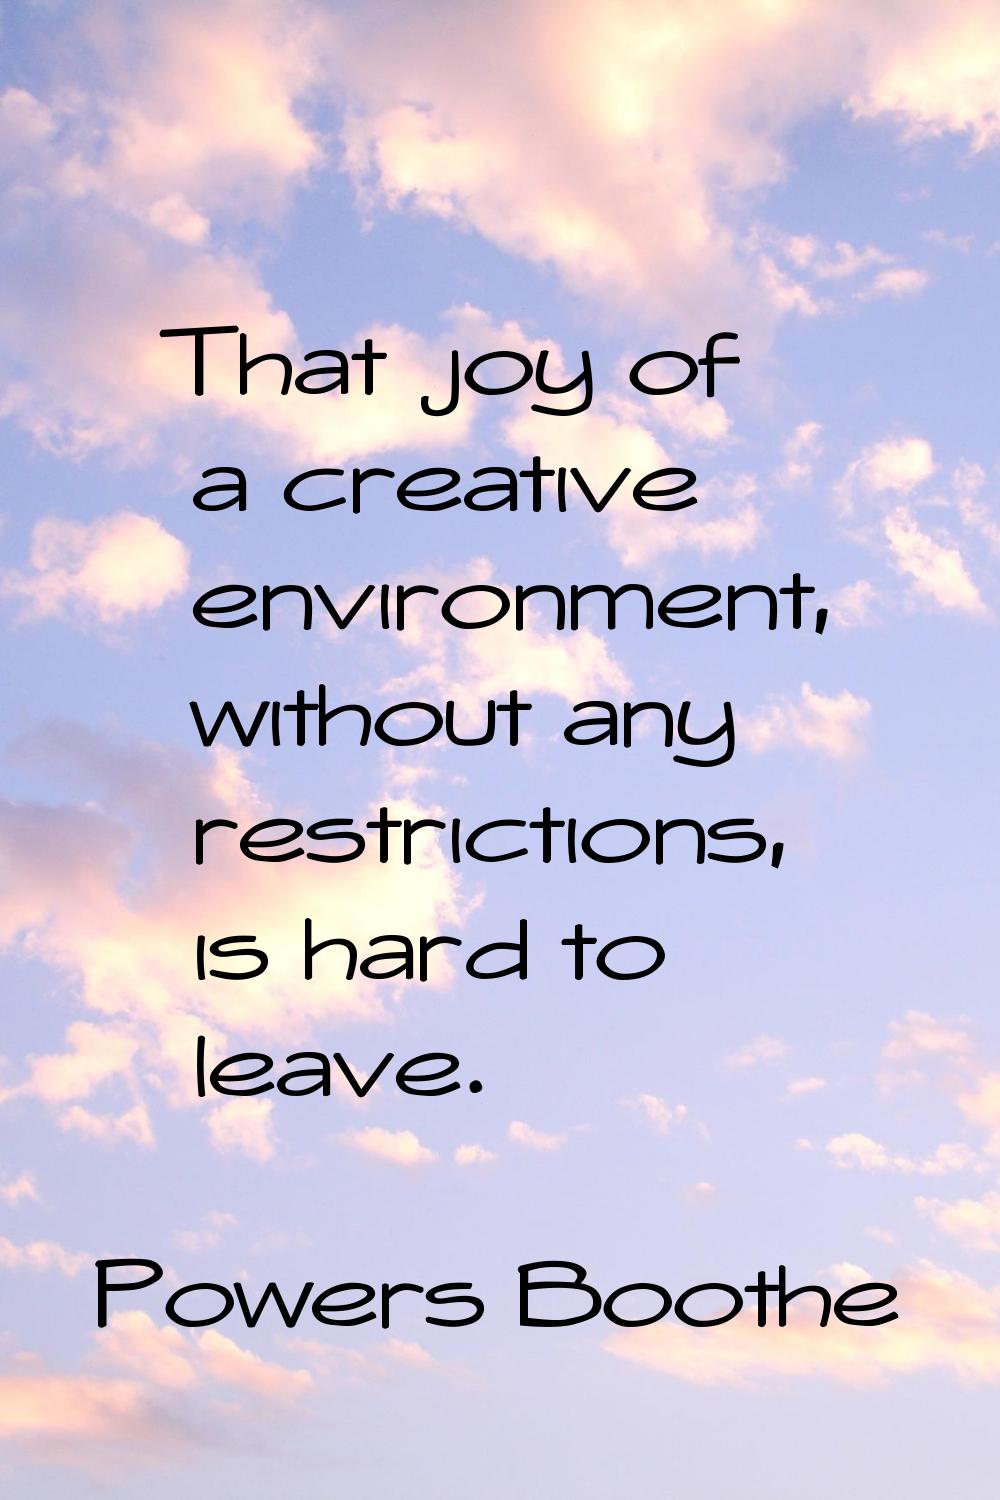 That joy of a creative environment, without any restrictions, is hard to leave.